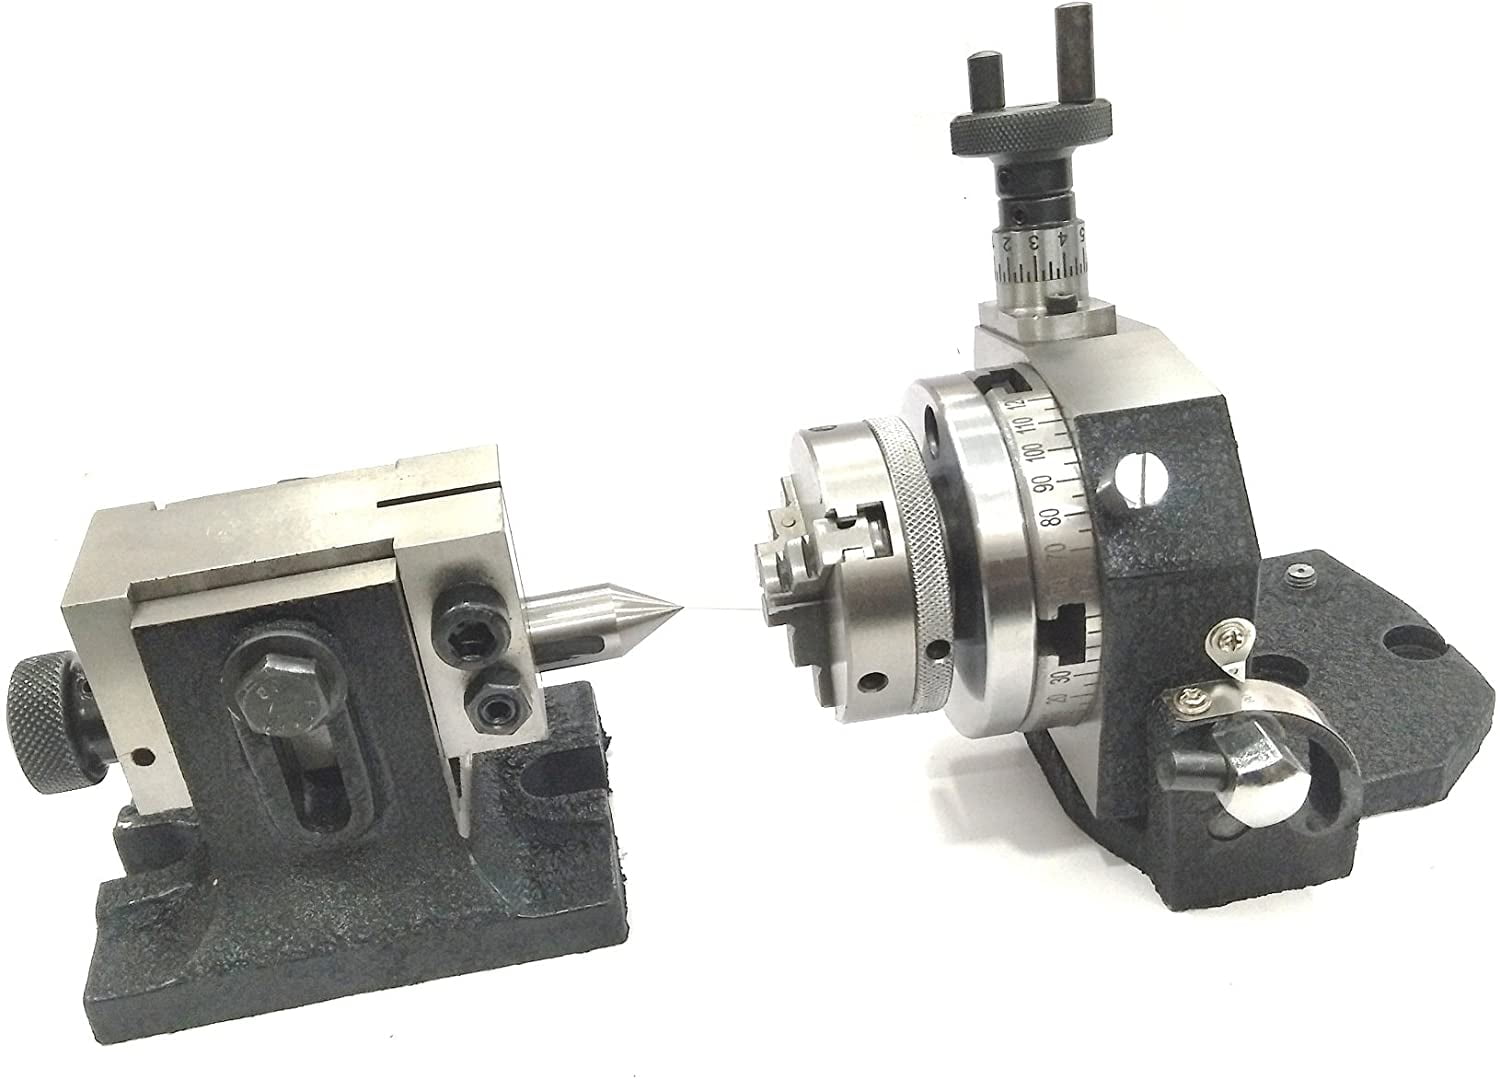 SINGLE BOLT UNIVERSAL TAILSTOCK FOR 3" & 4" ROTARY TABLE 